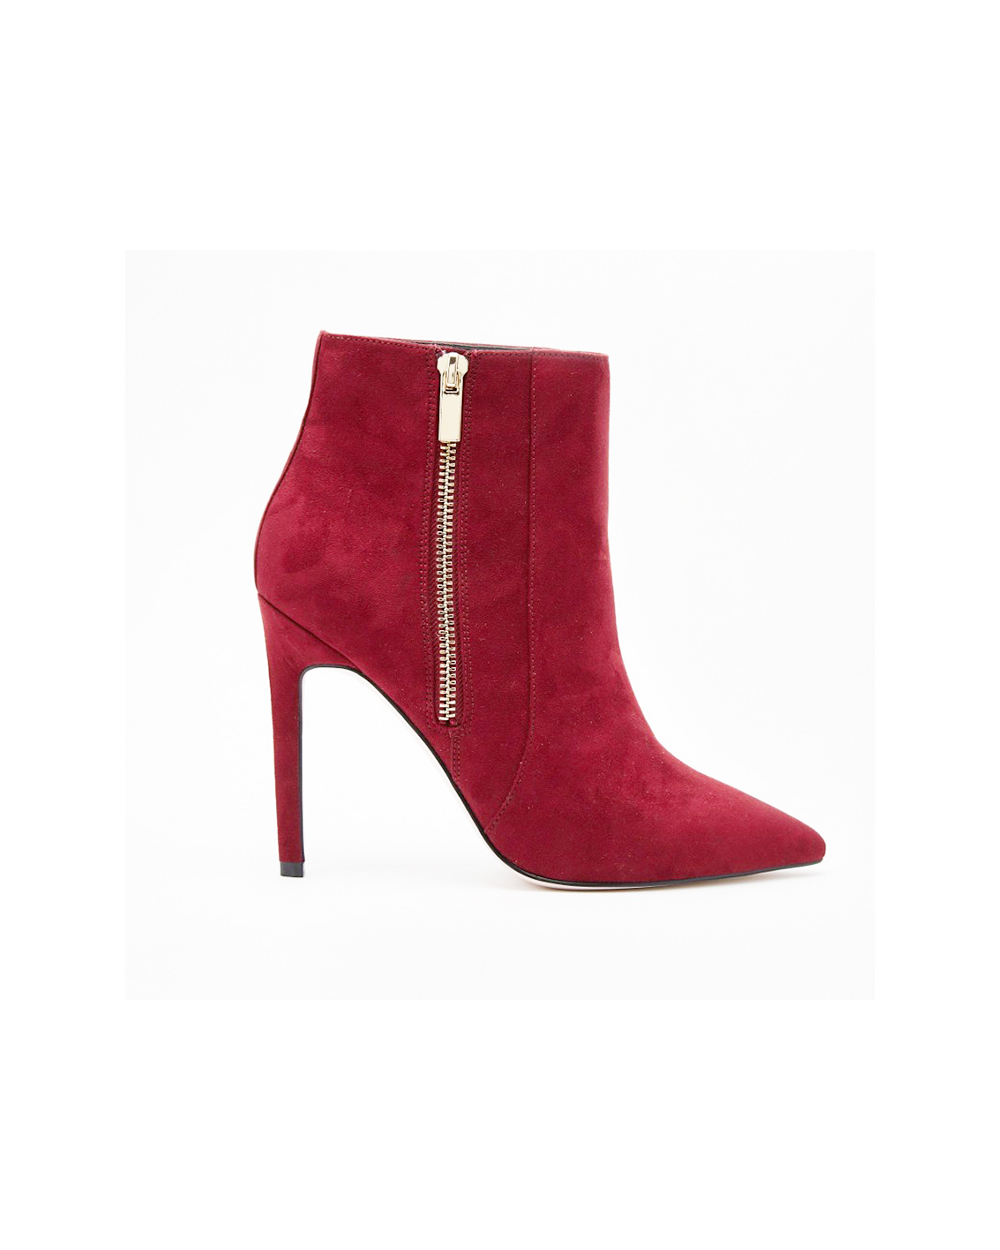 Pointed High Ankle Boots, $96.50, from ASOS